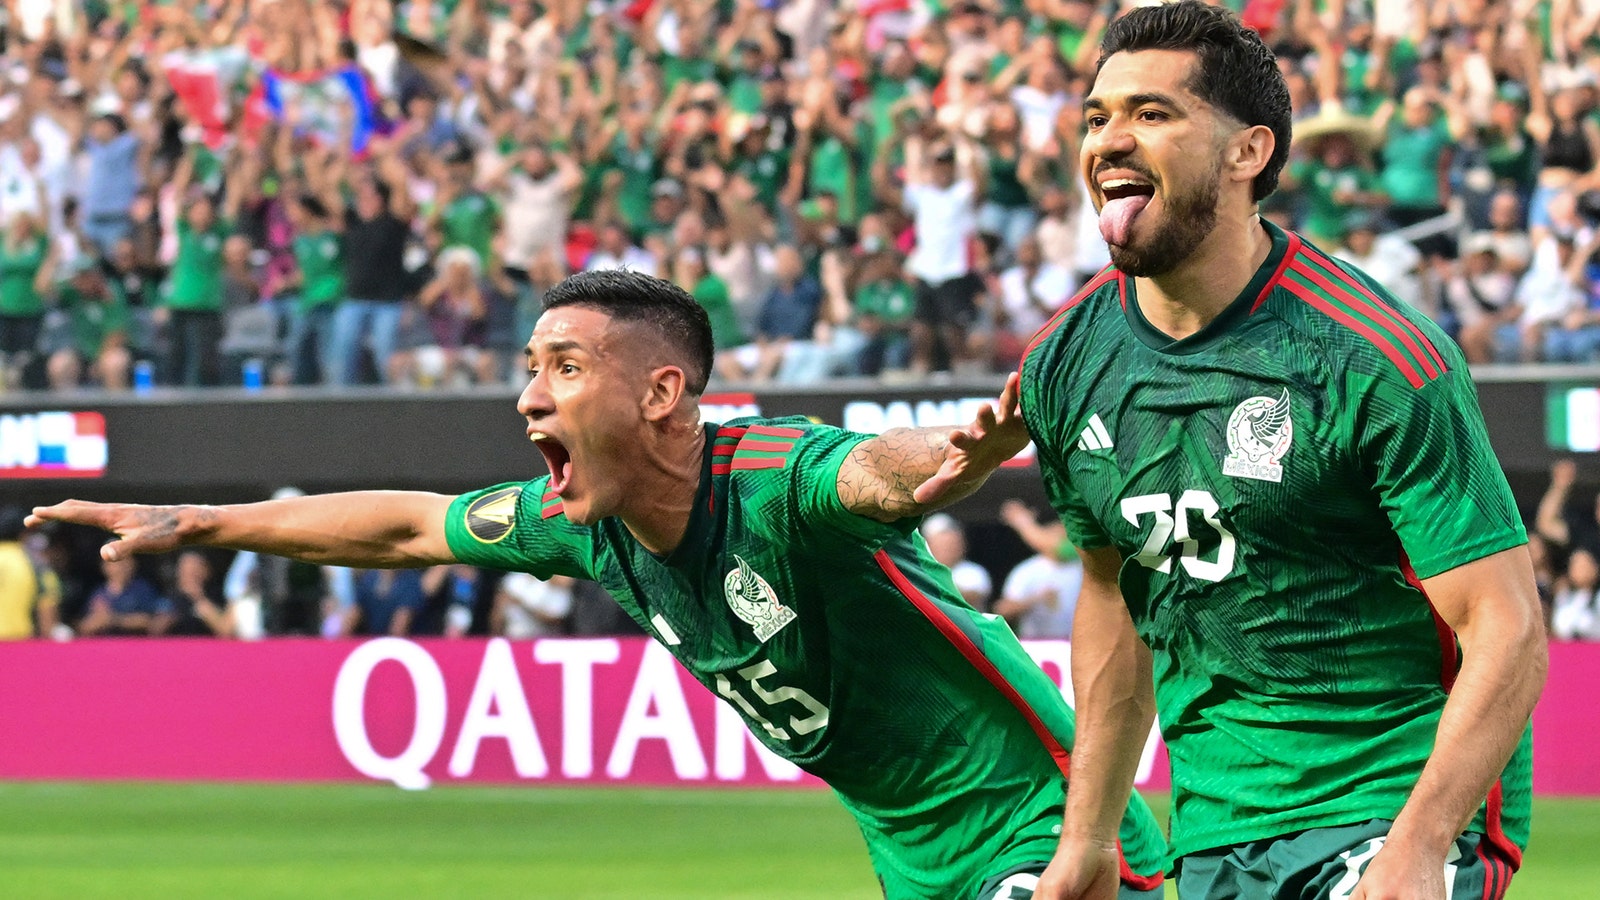 Mexico vs. Panama Highlights | CONCACAF Gold Cup Final